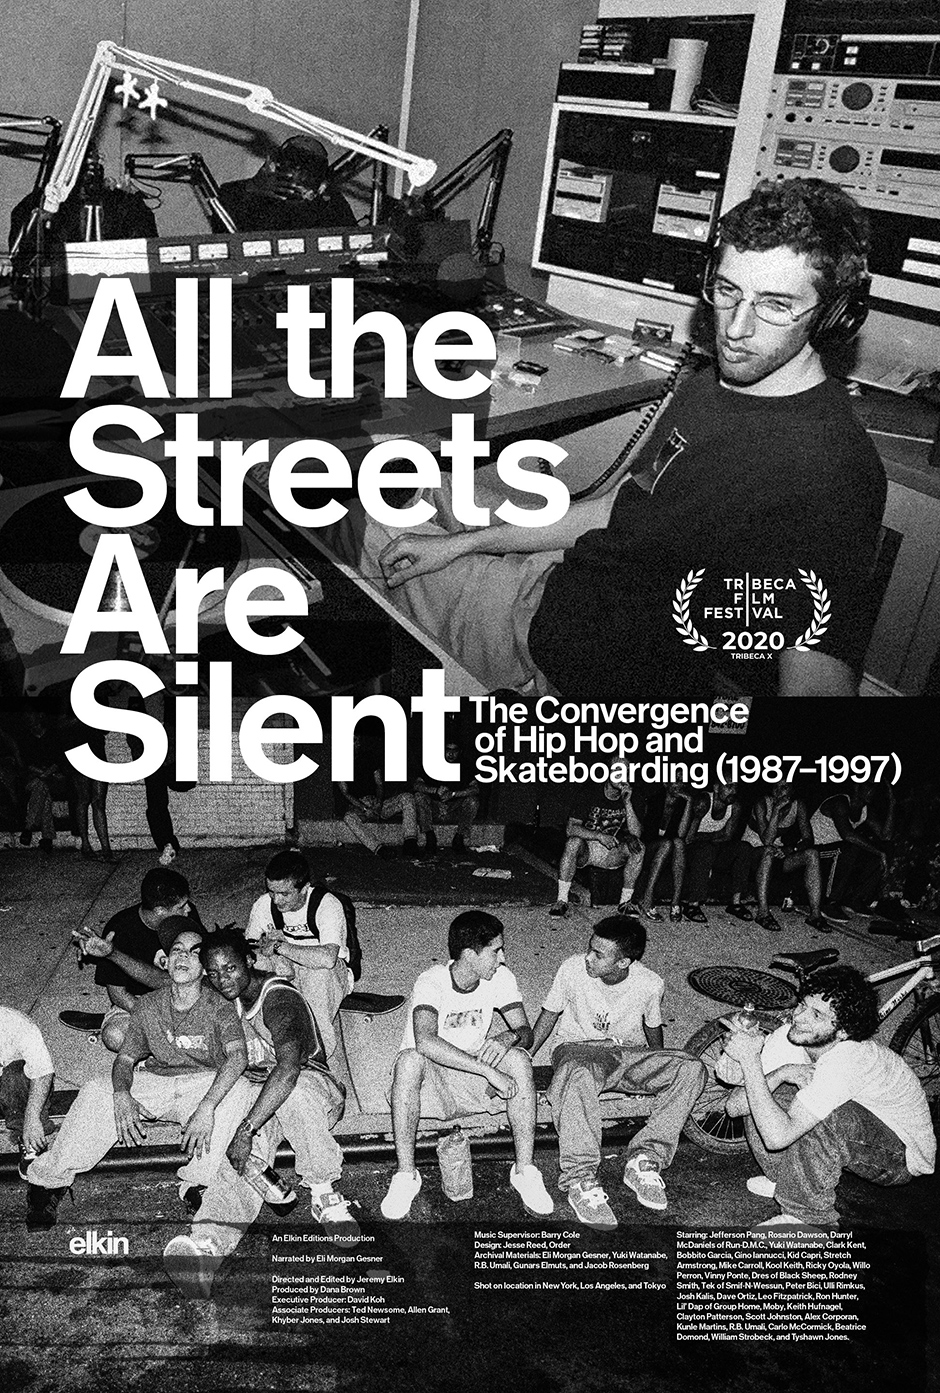 Stay tuned for All The Streets Are Silent which will be released in 2021